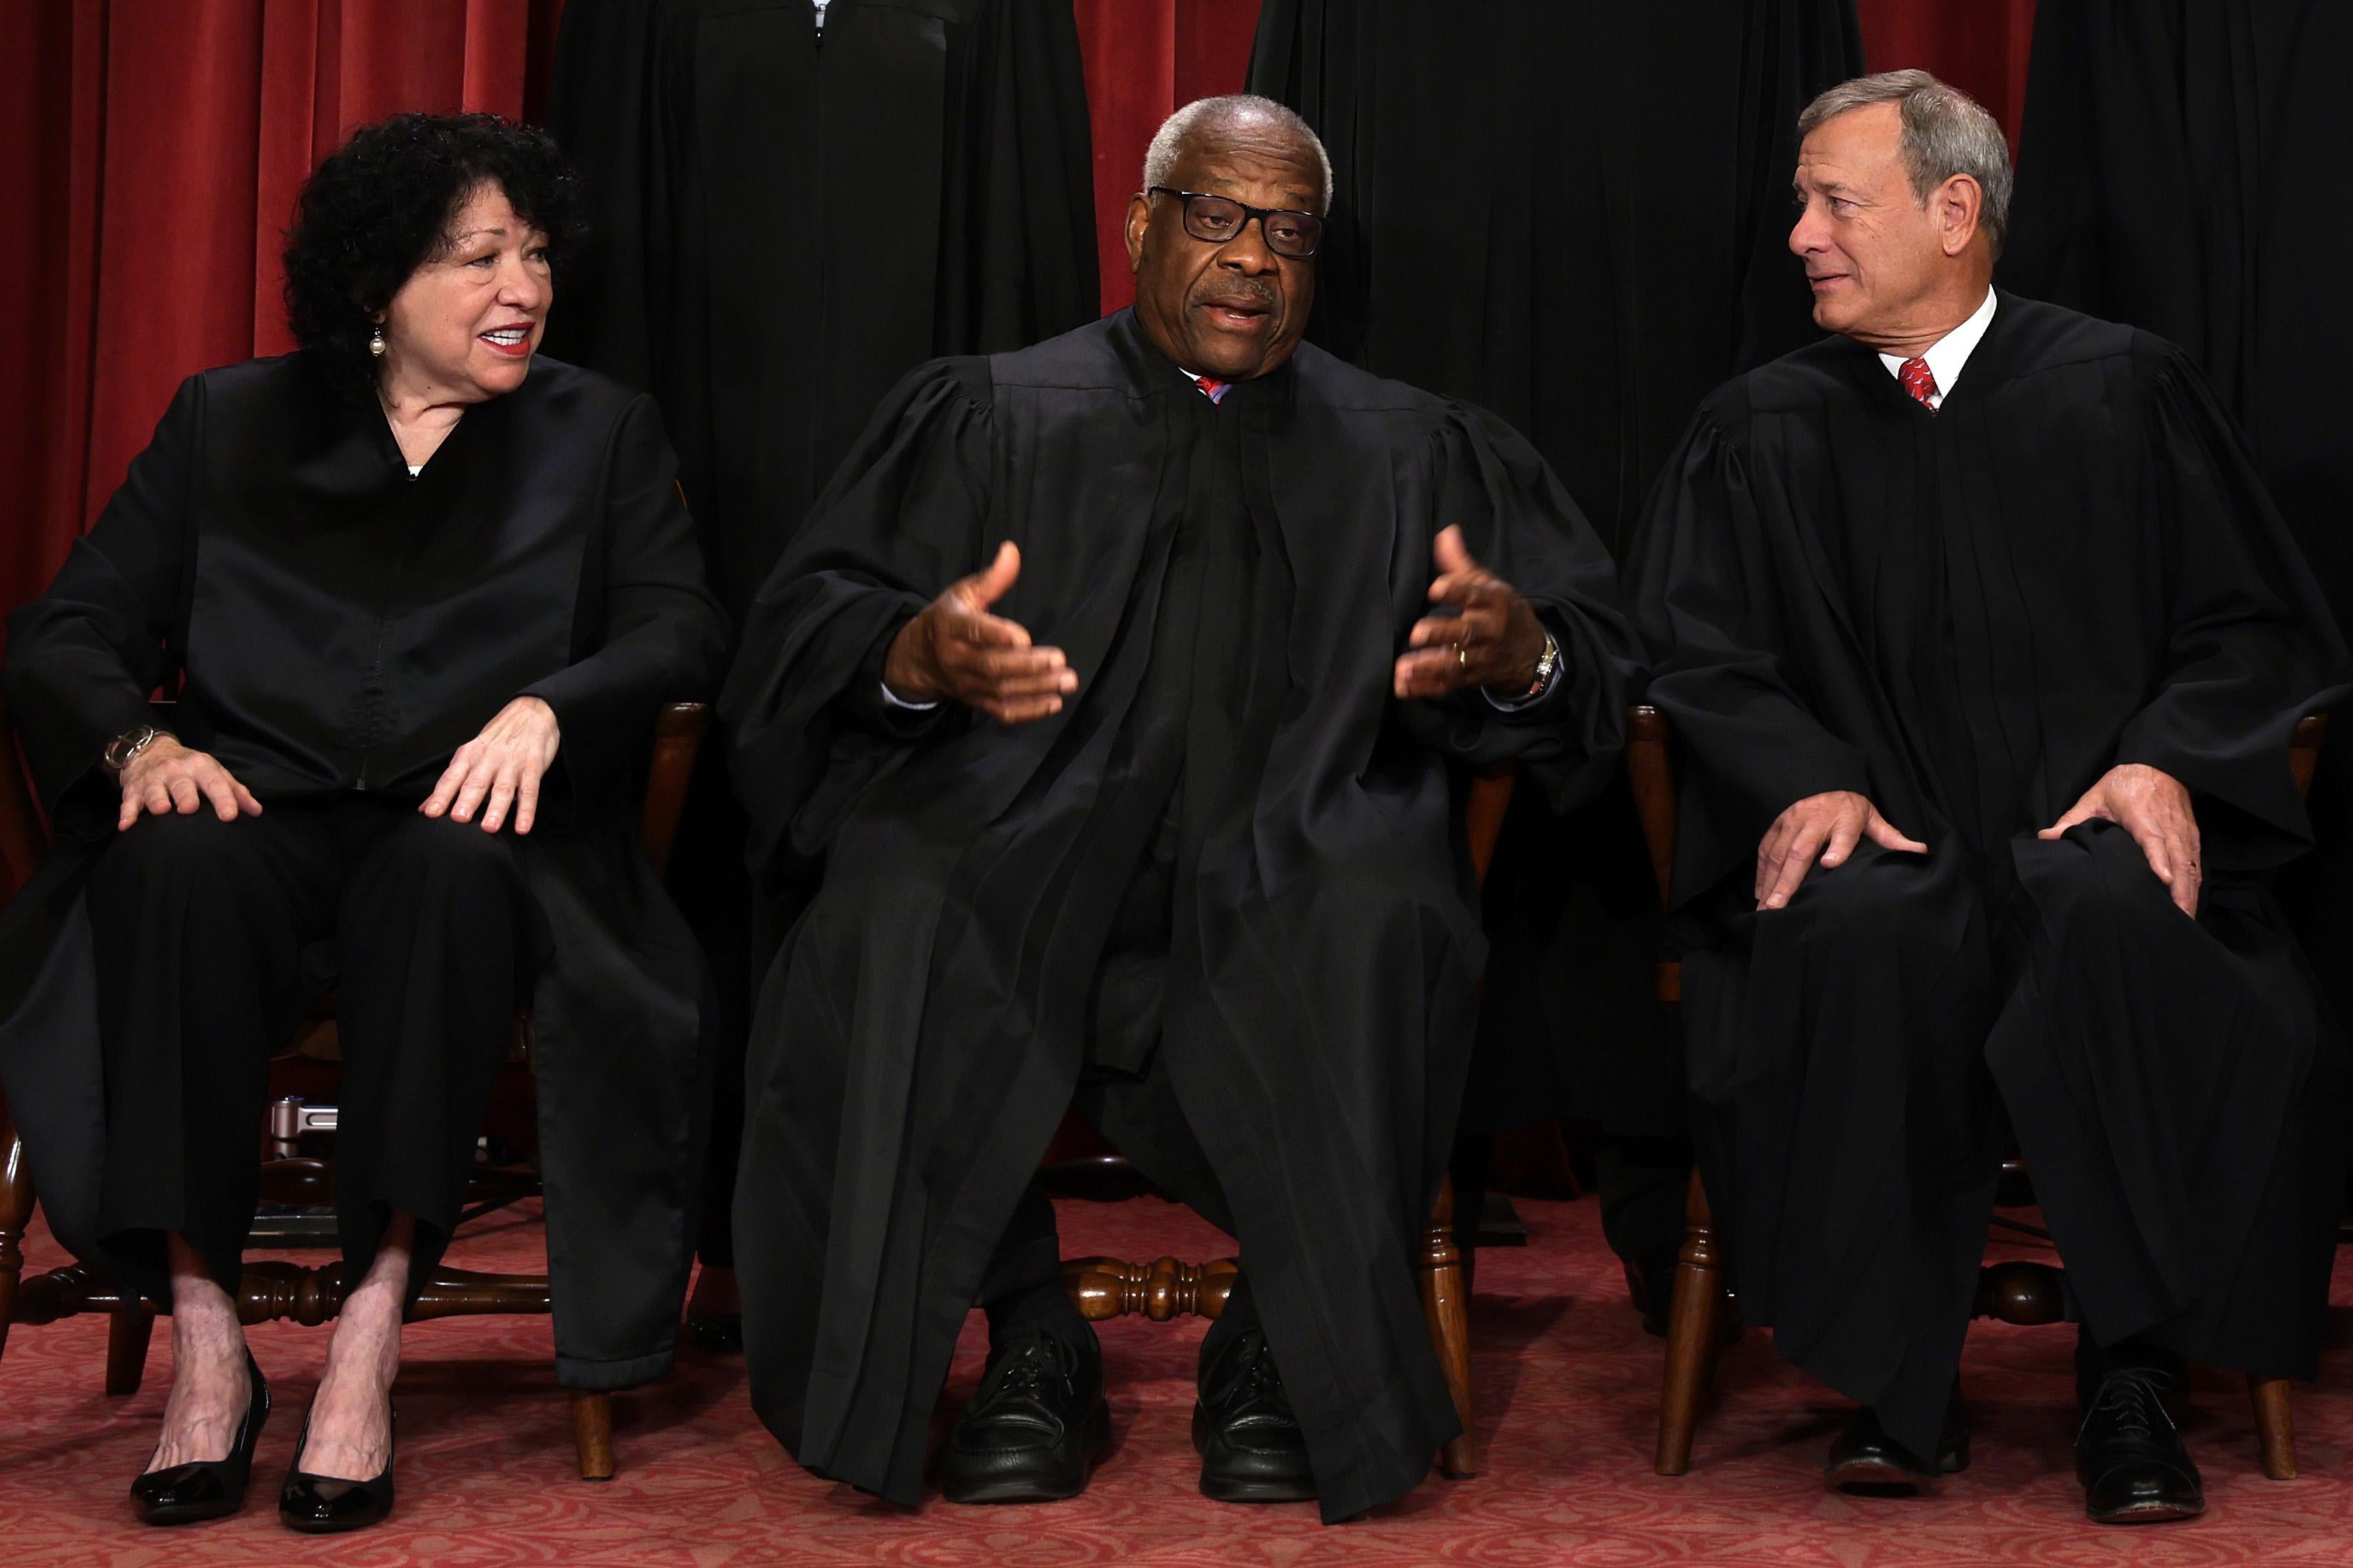 Sotomayor and Thomas are talking and Roberts looks like he's listening.